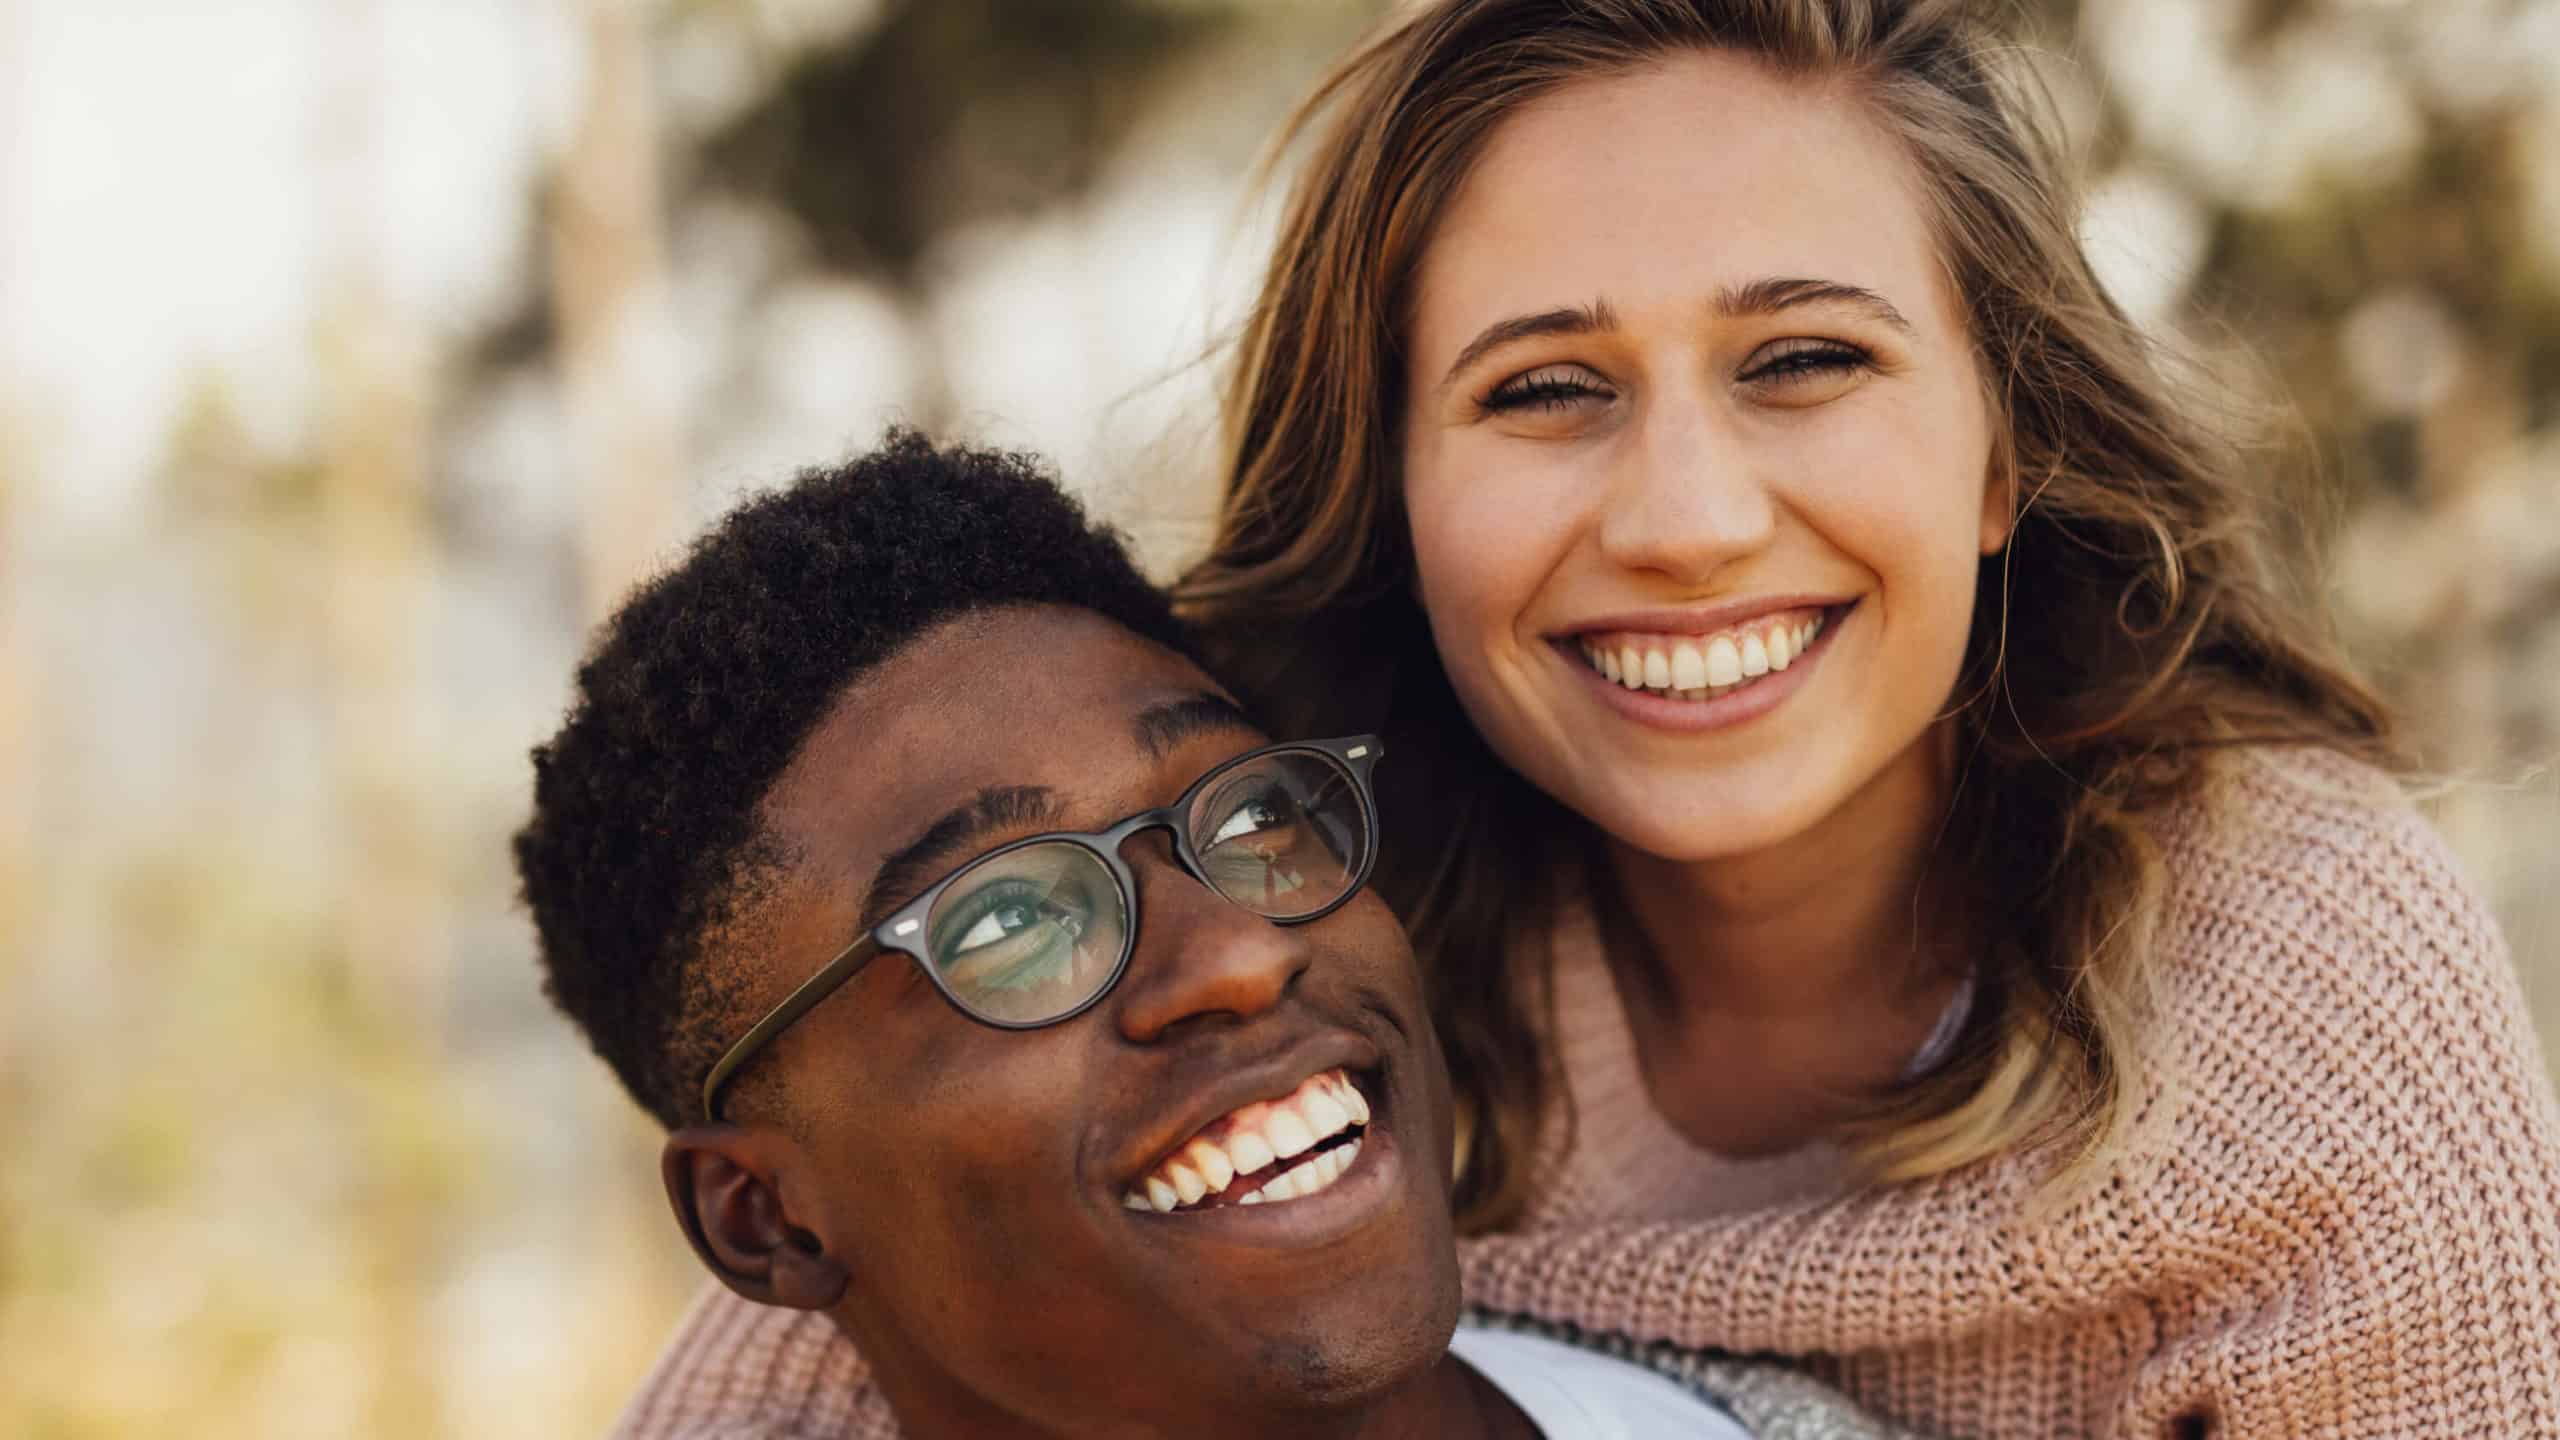 Christian perspective dating interracial RACIAL ISSUES—Is. 